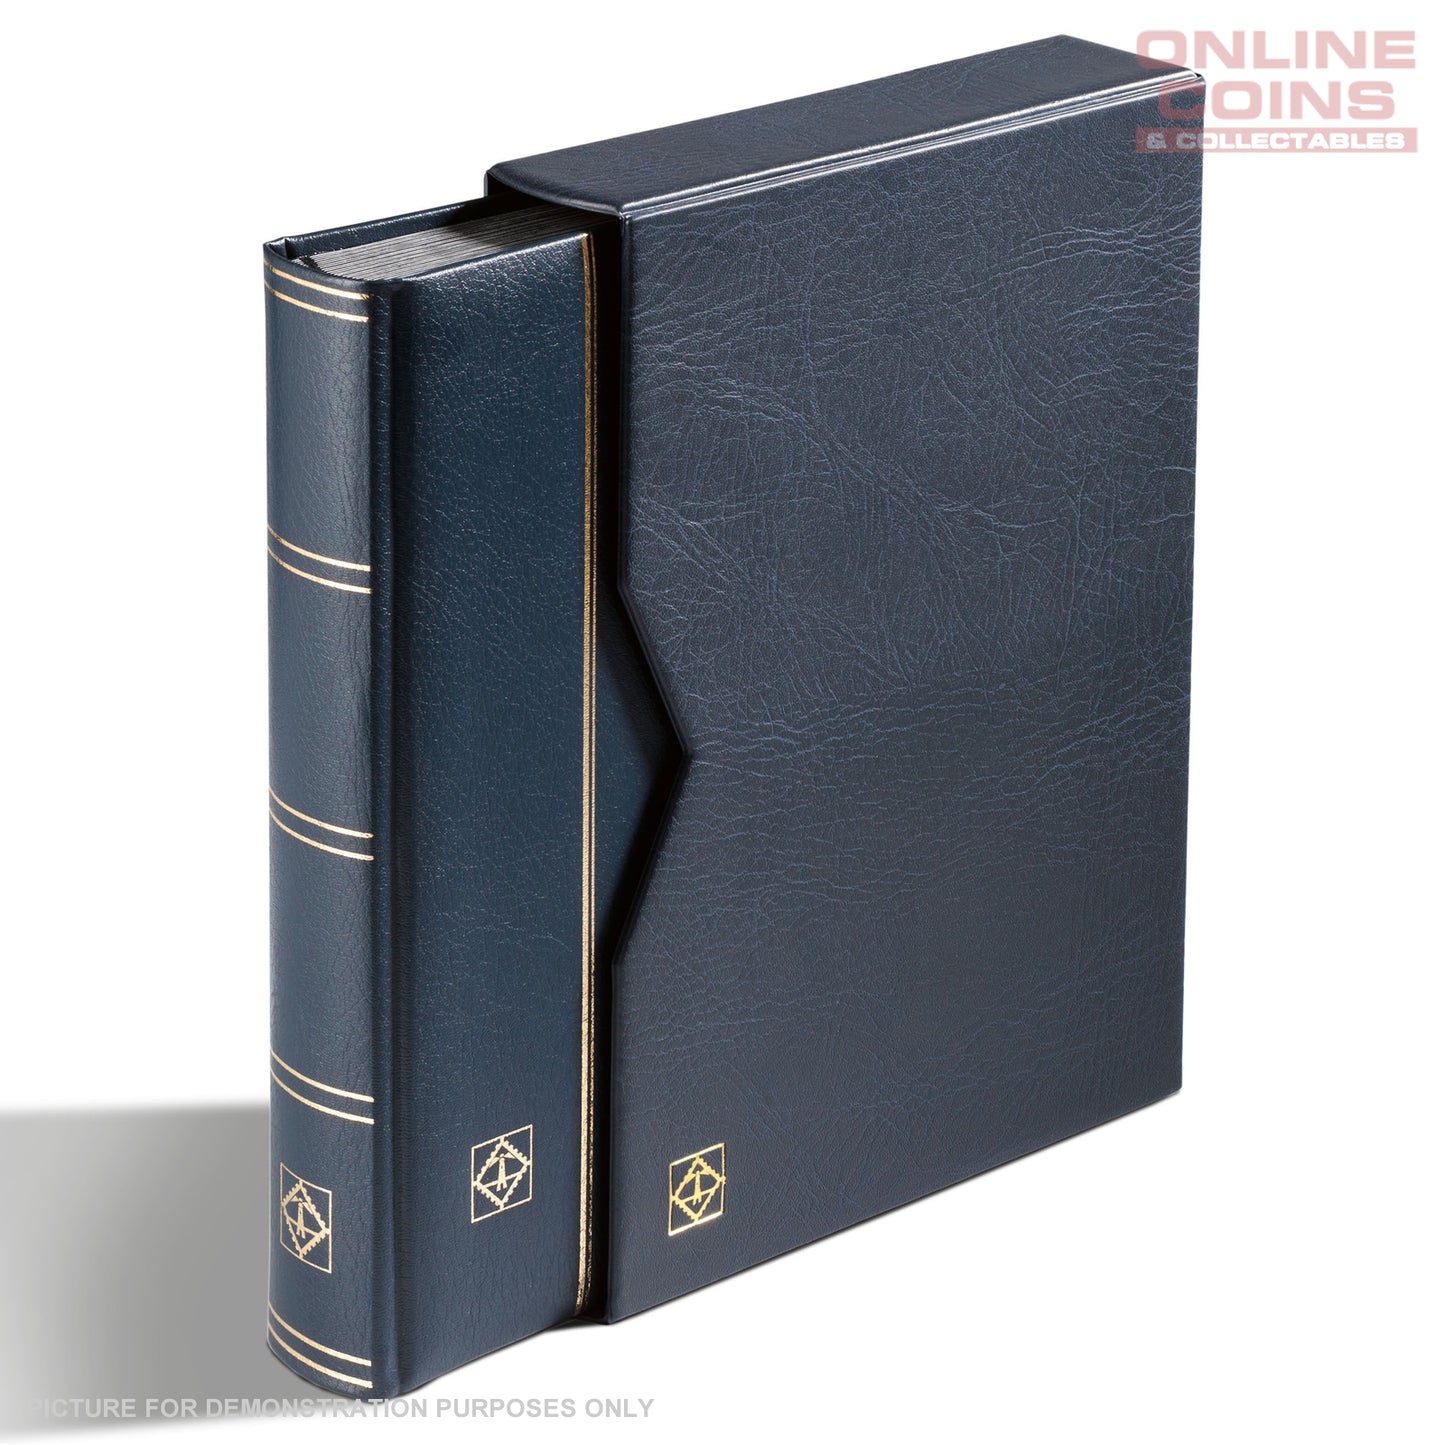 Lighthouse A4 PREMIUM Stockbook & Slipcase 64 Page - Padded Leather Cover - BLACK